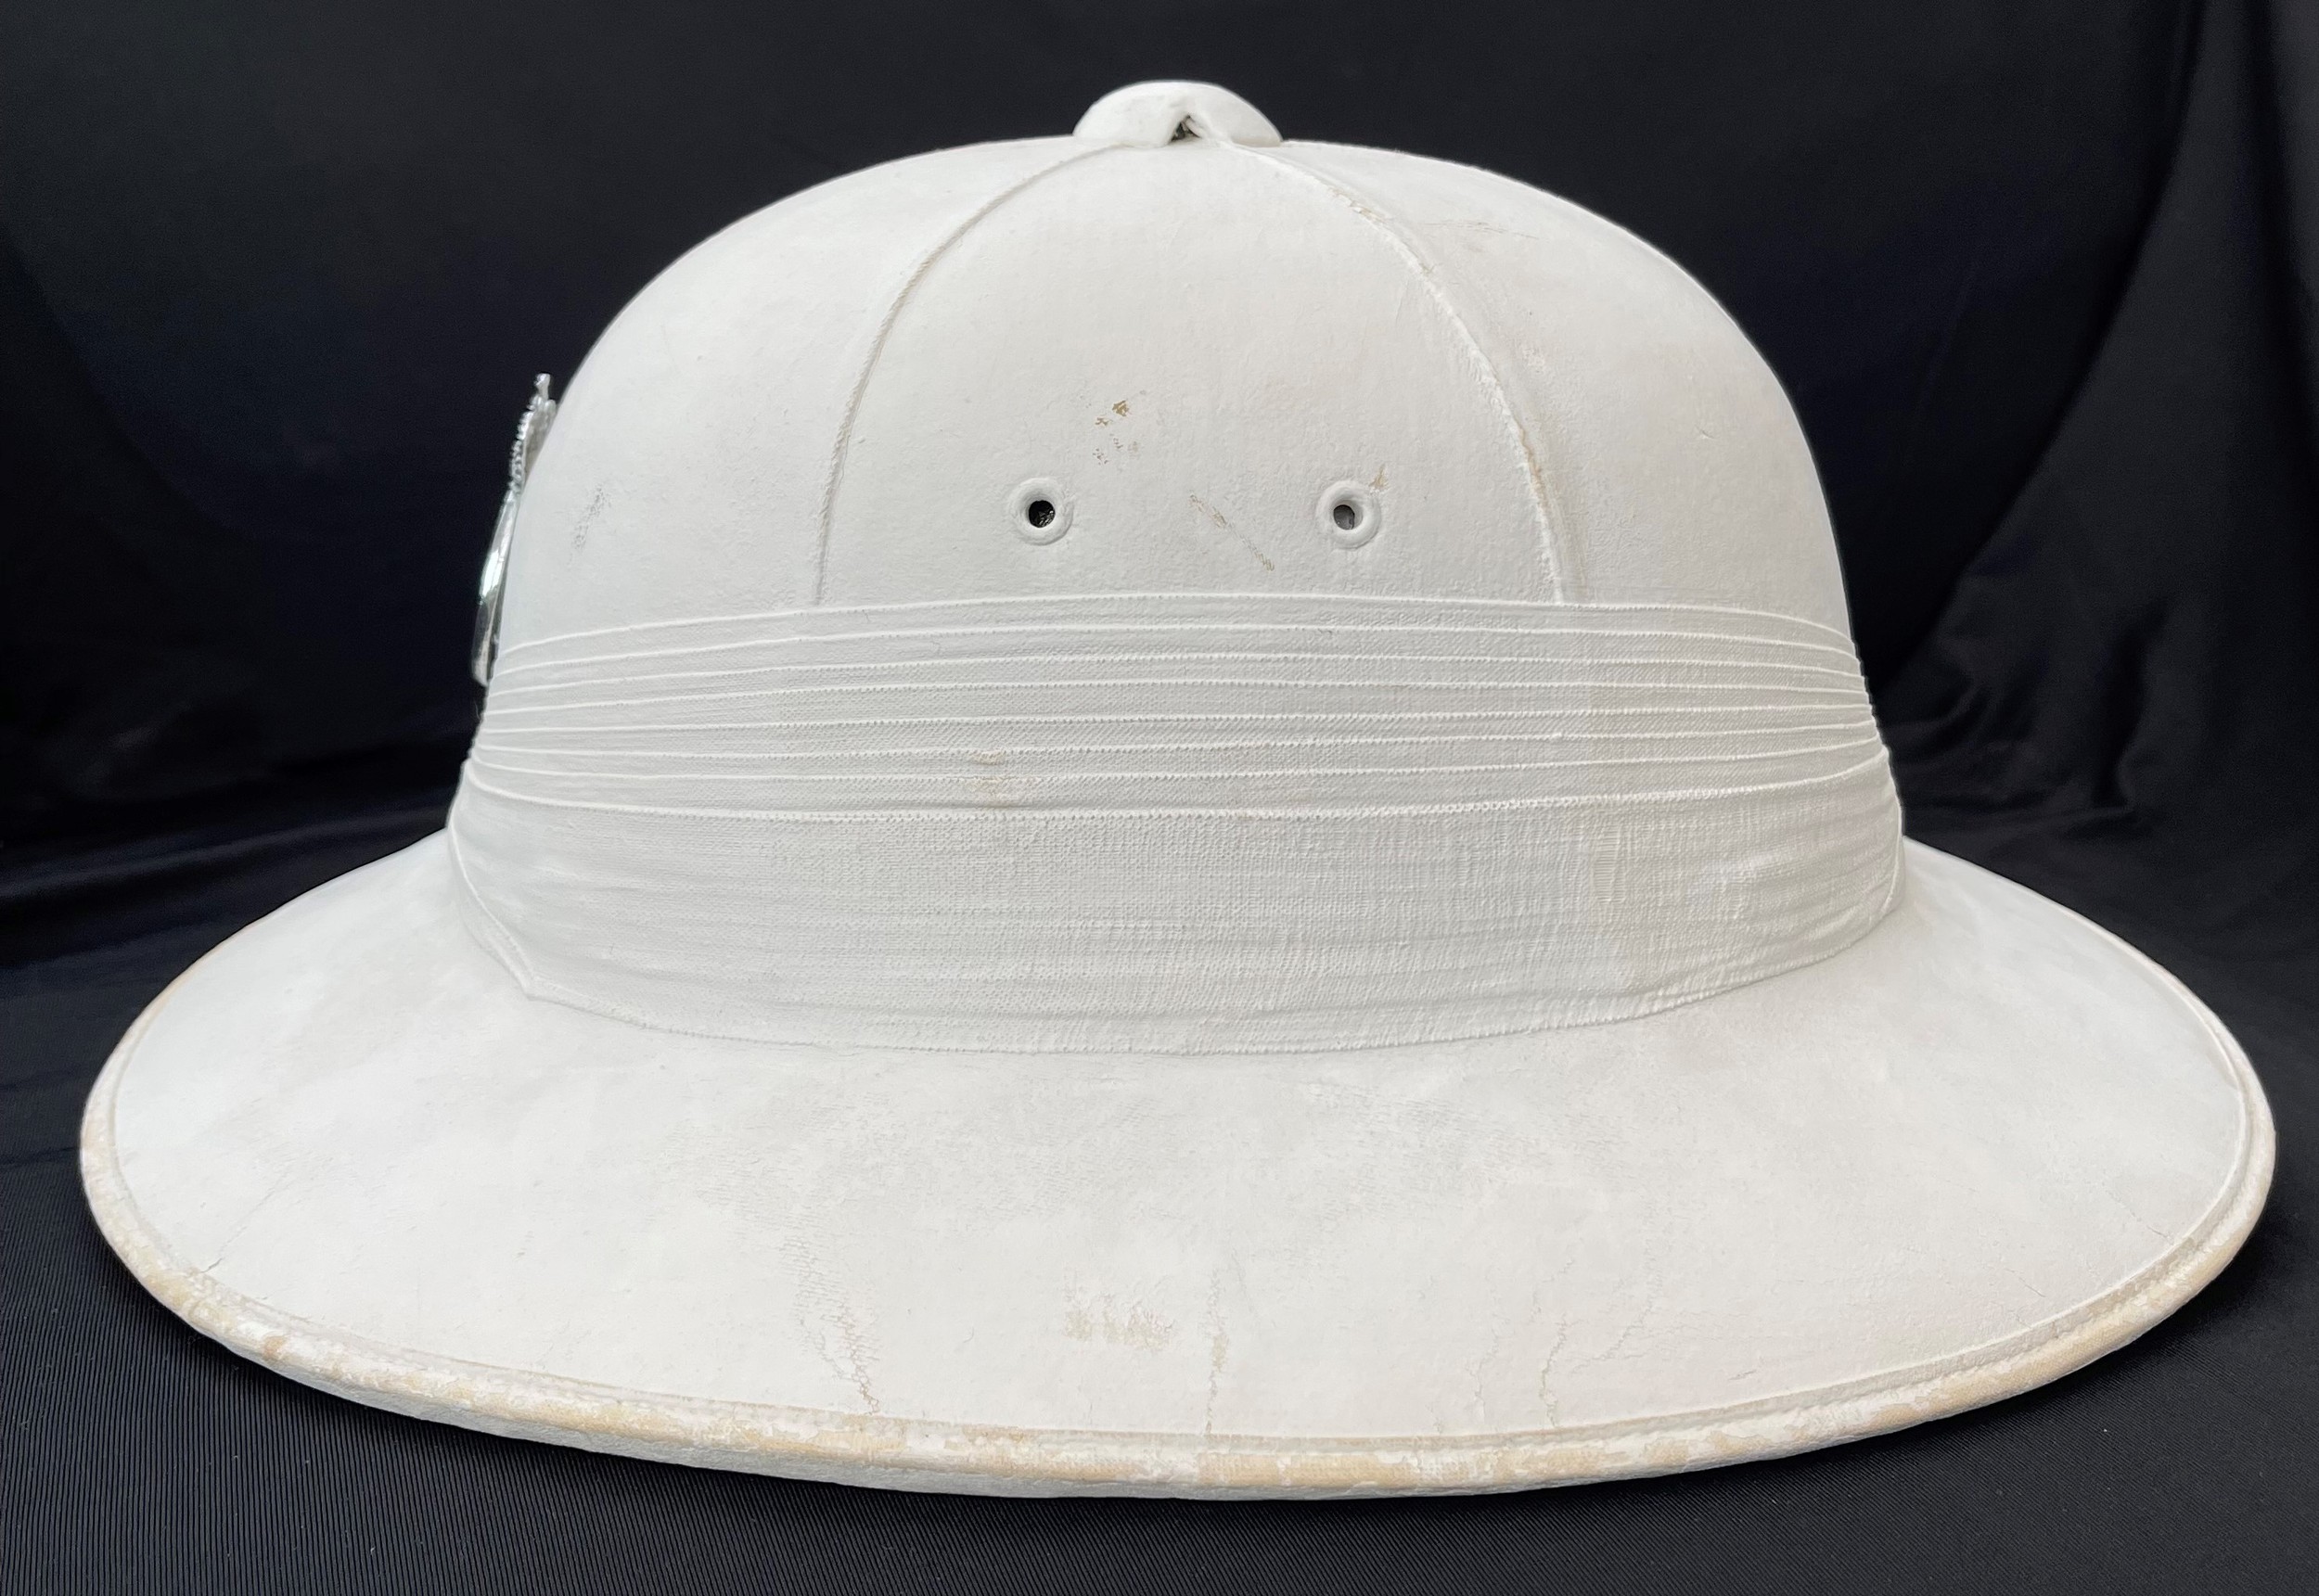 British Police Officers States of Jersey White Pith Helmet complete with Queens Crown Cap Badge. - Image 3 of 5